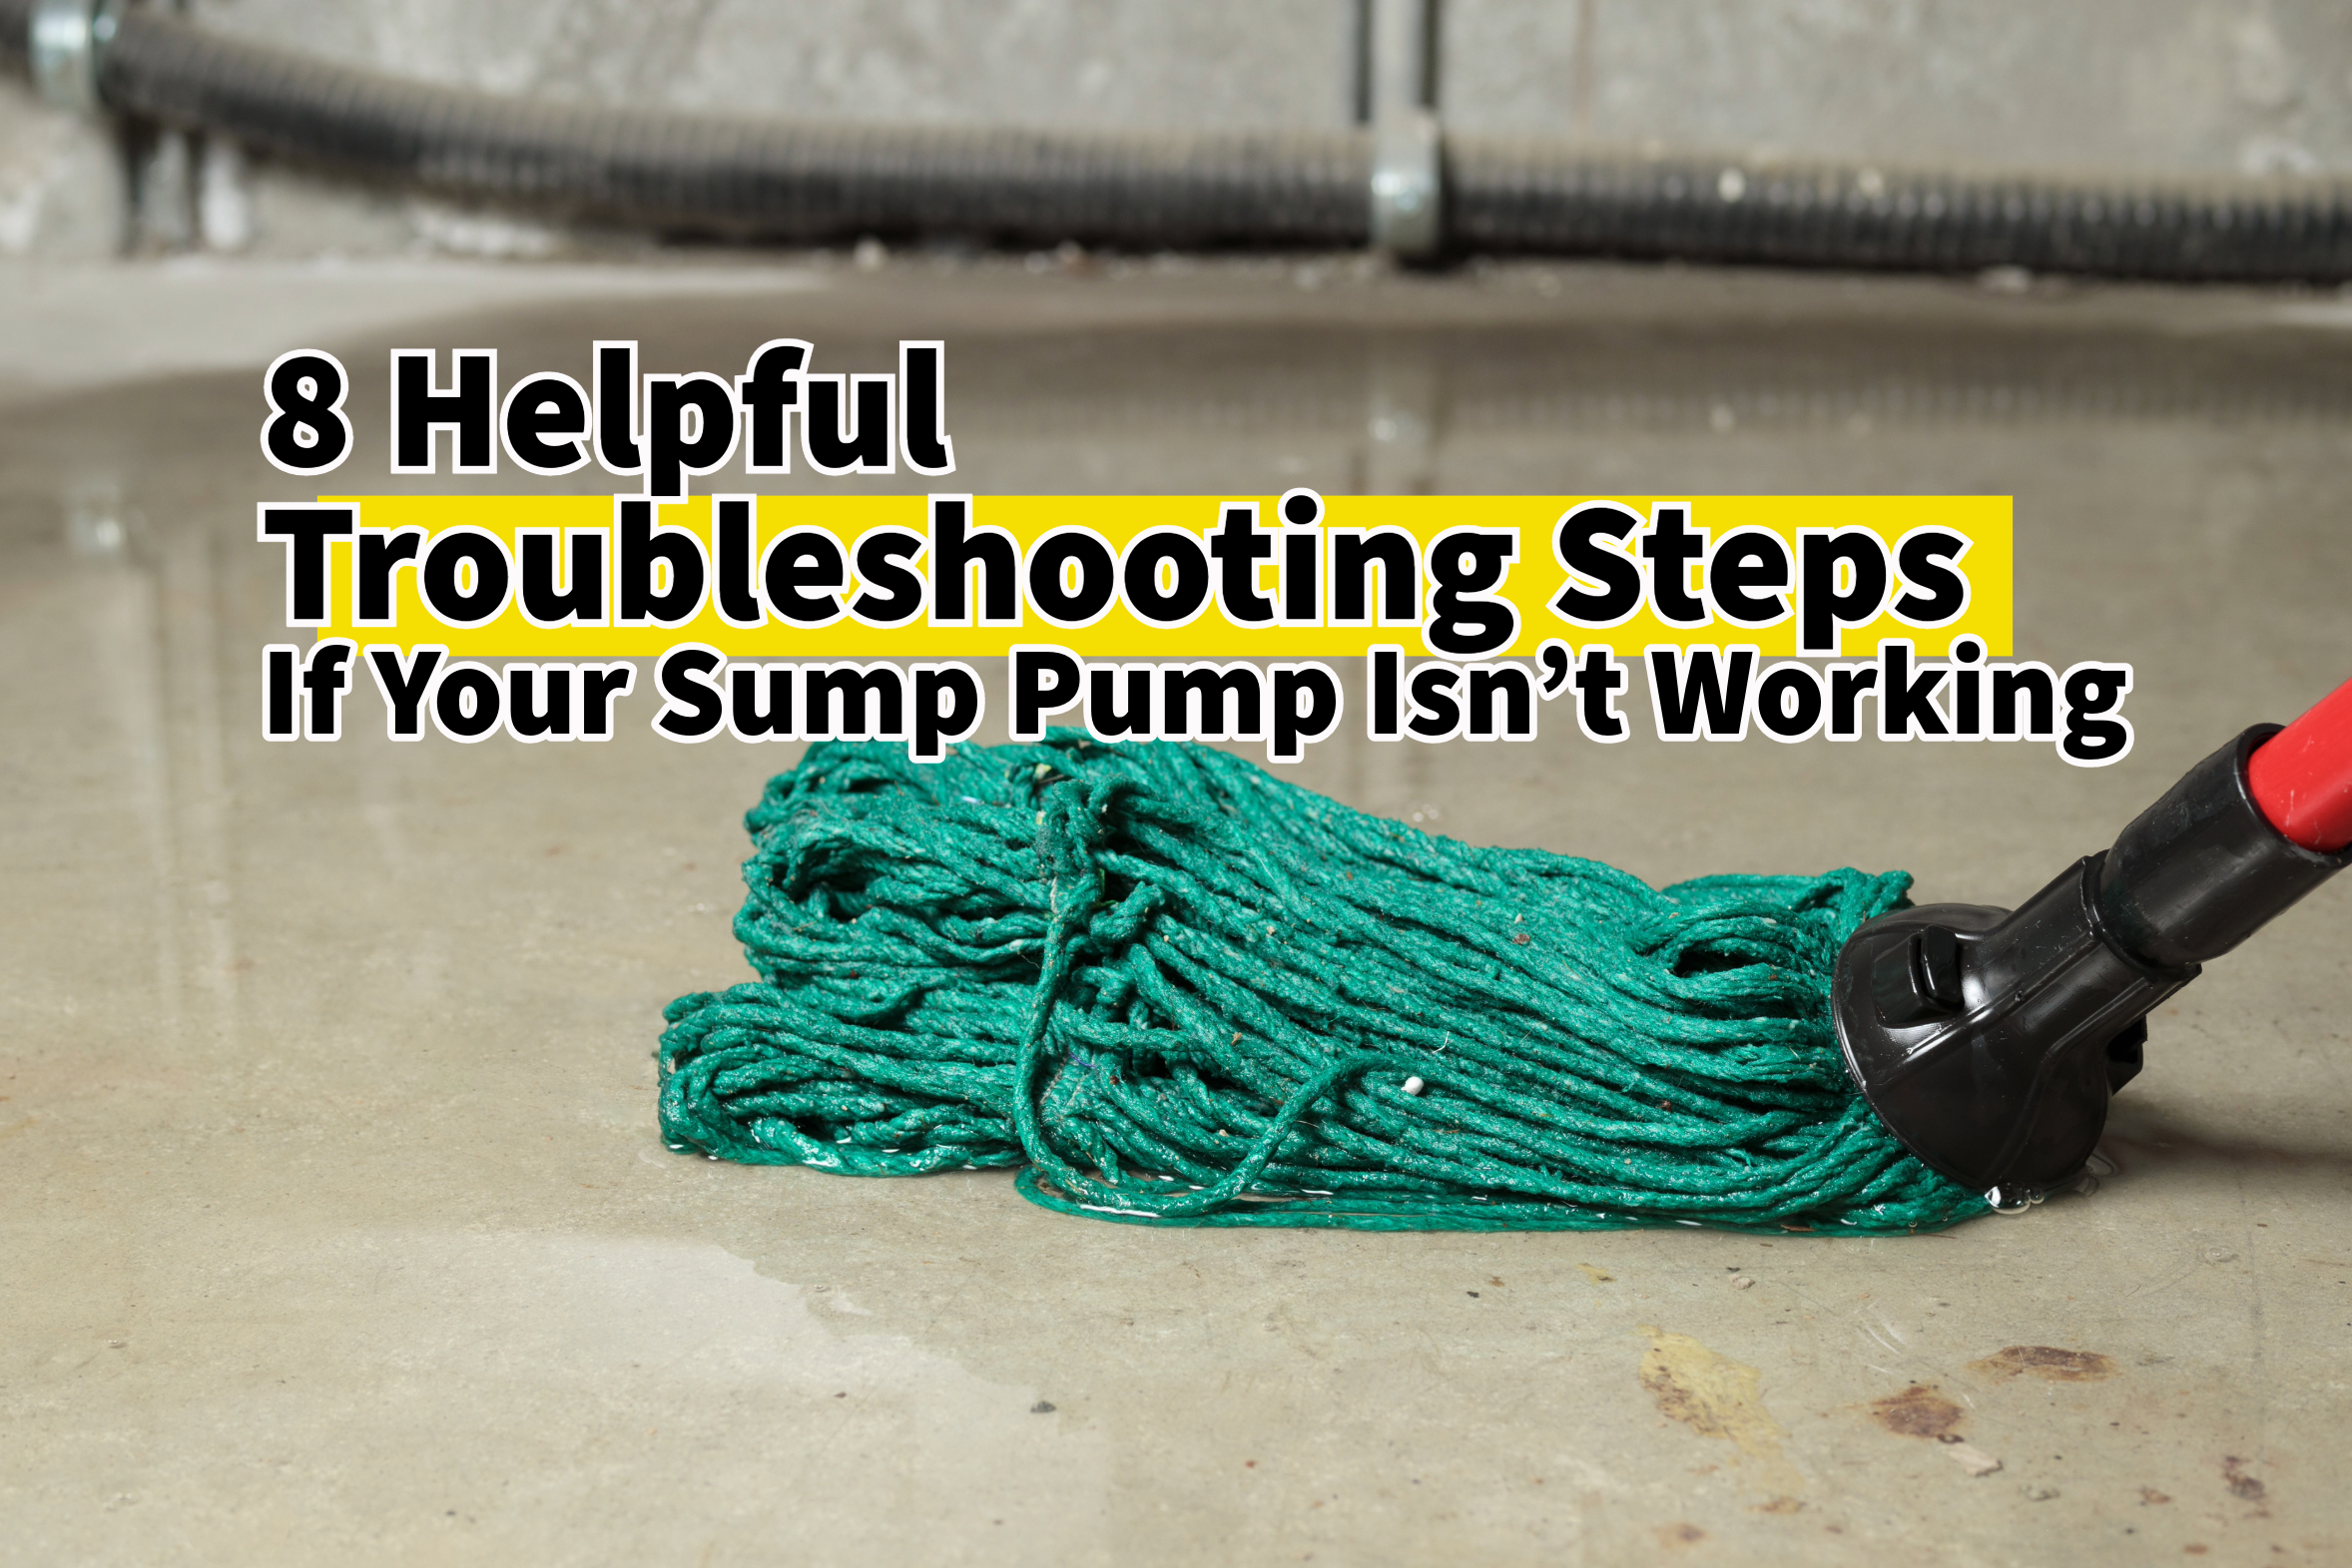 A homeowner’s guide to troubleshooting a malfunctioning sump pump. Plumbing and drain services in Huber Heights, Ohio.